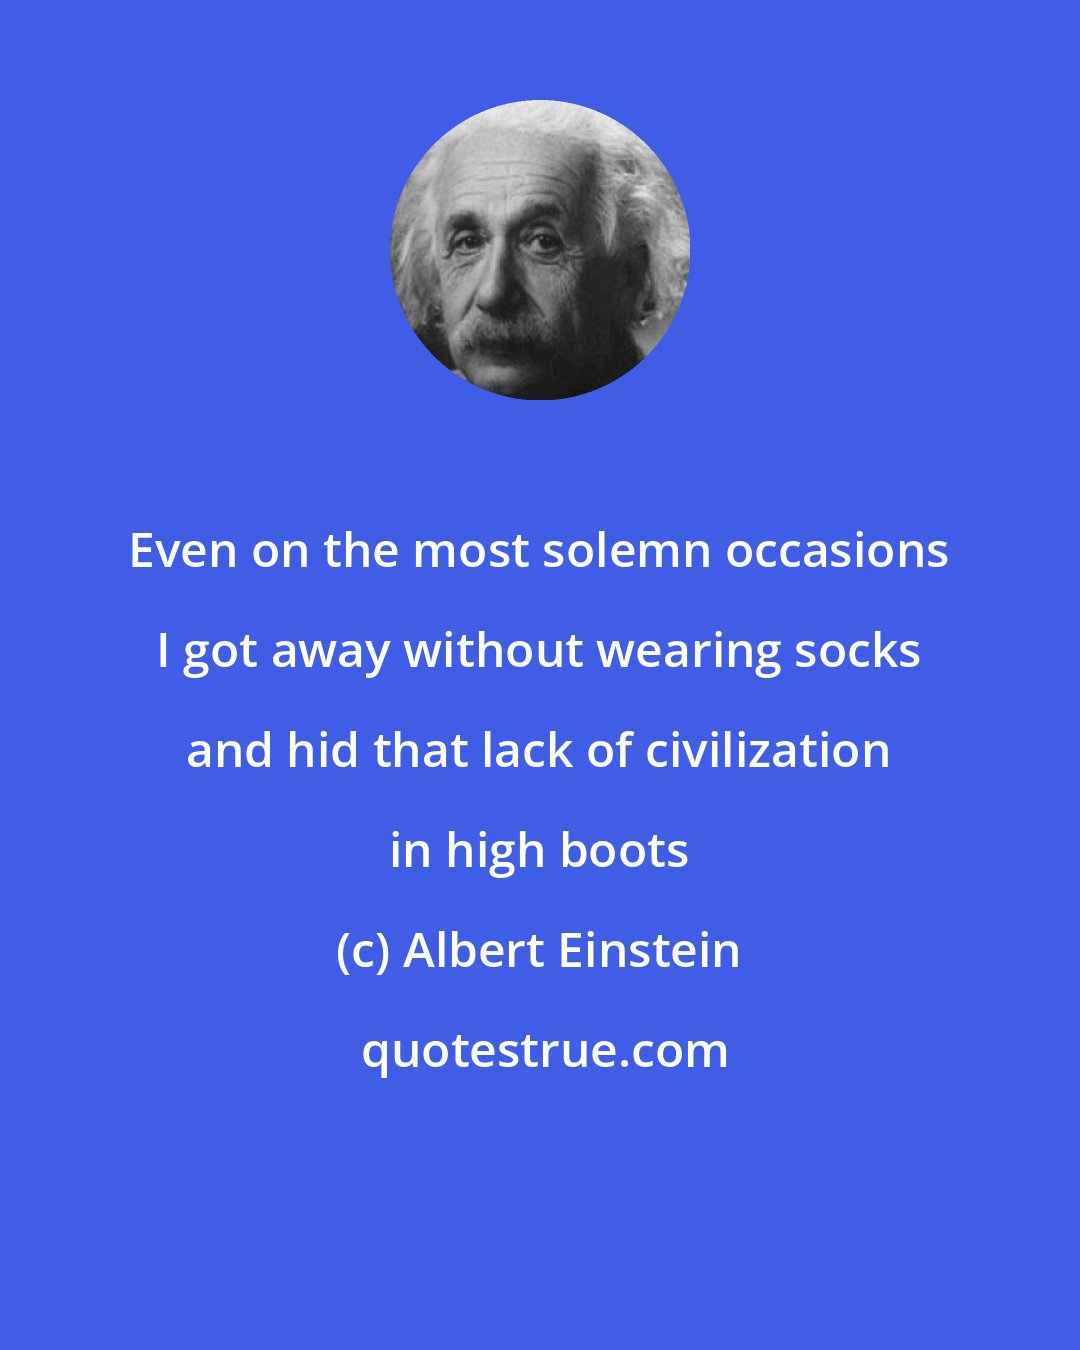 Albert Einstein: Even on the most solemn occasions I got away without wearing socks and hid that lack of civilization in high boots